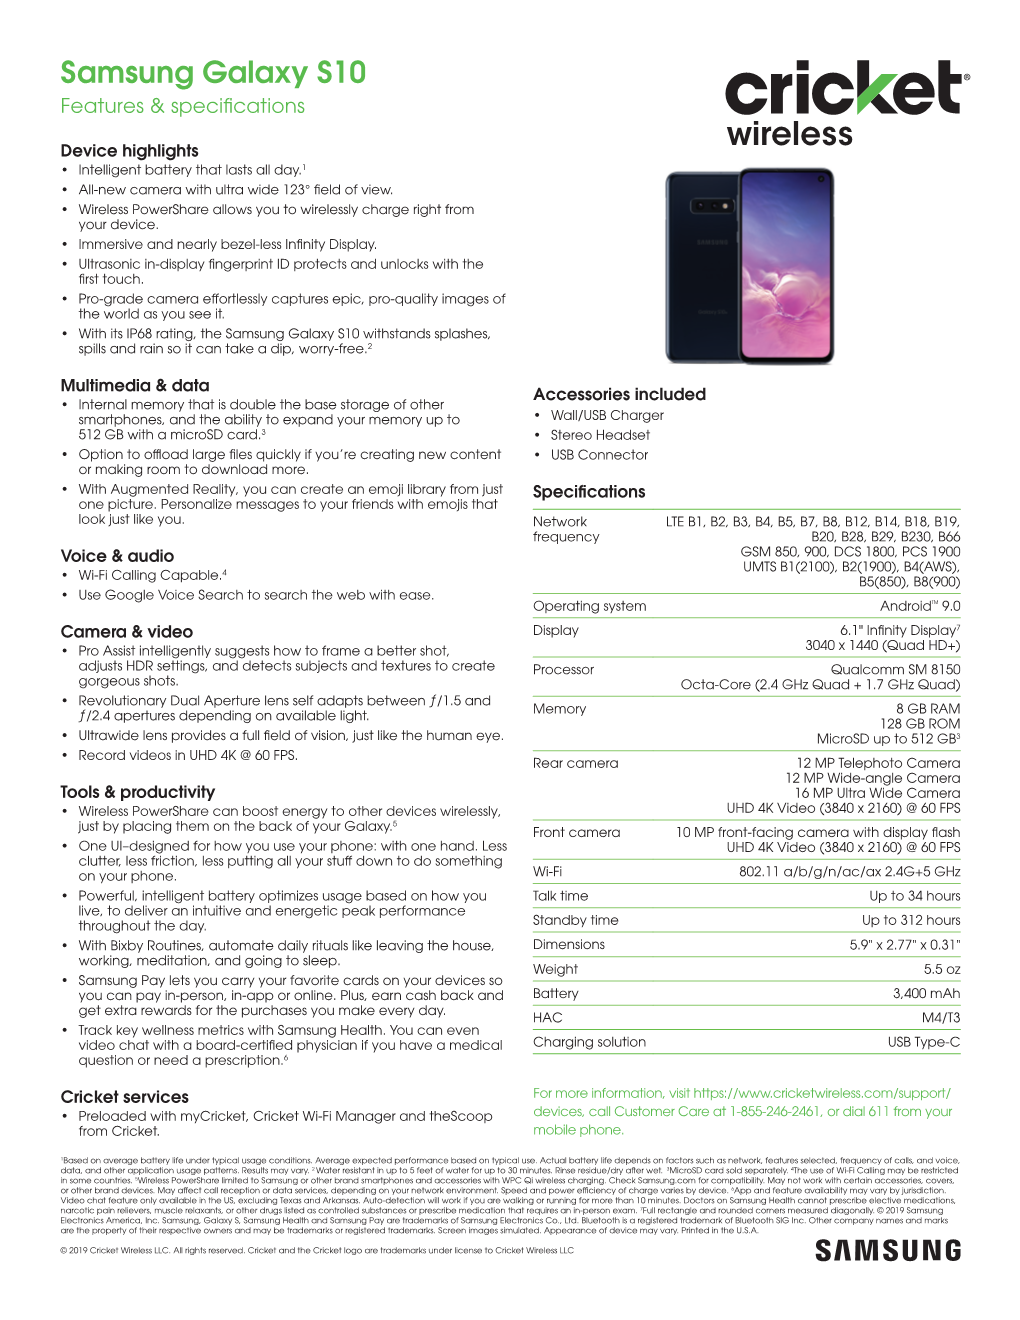 Samsung Galaxy S10 Features & Specifications